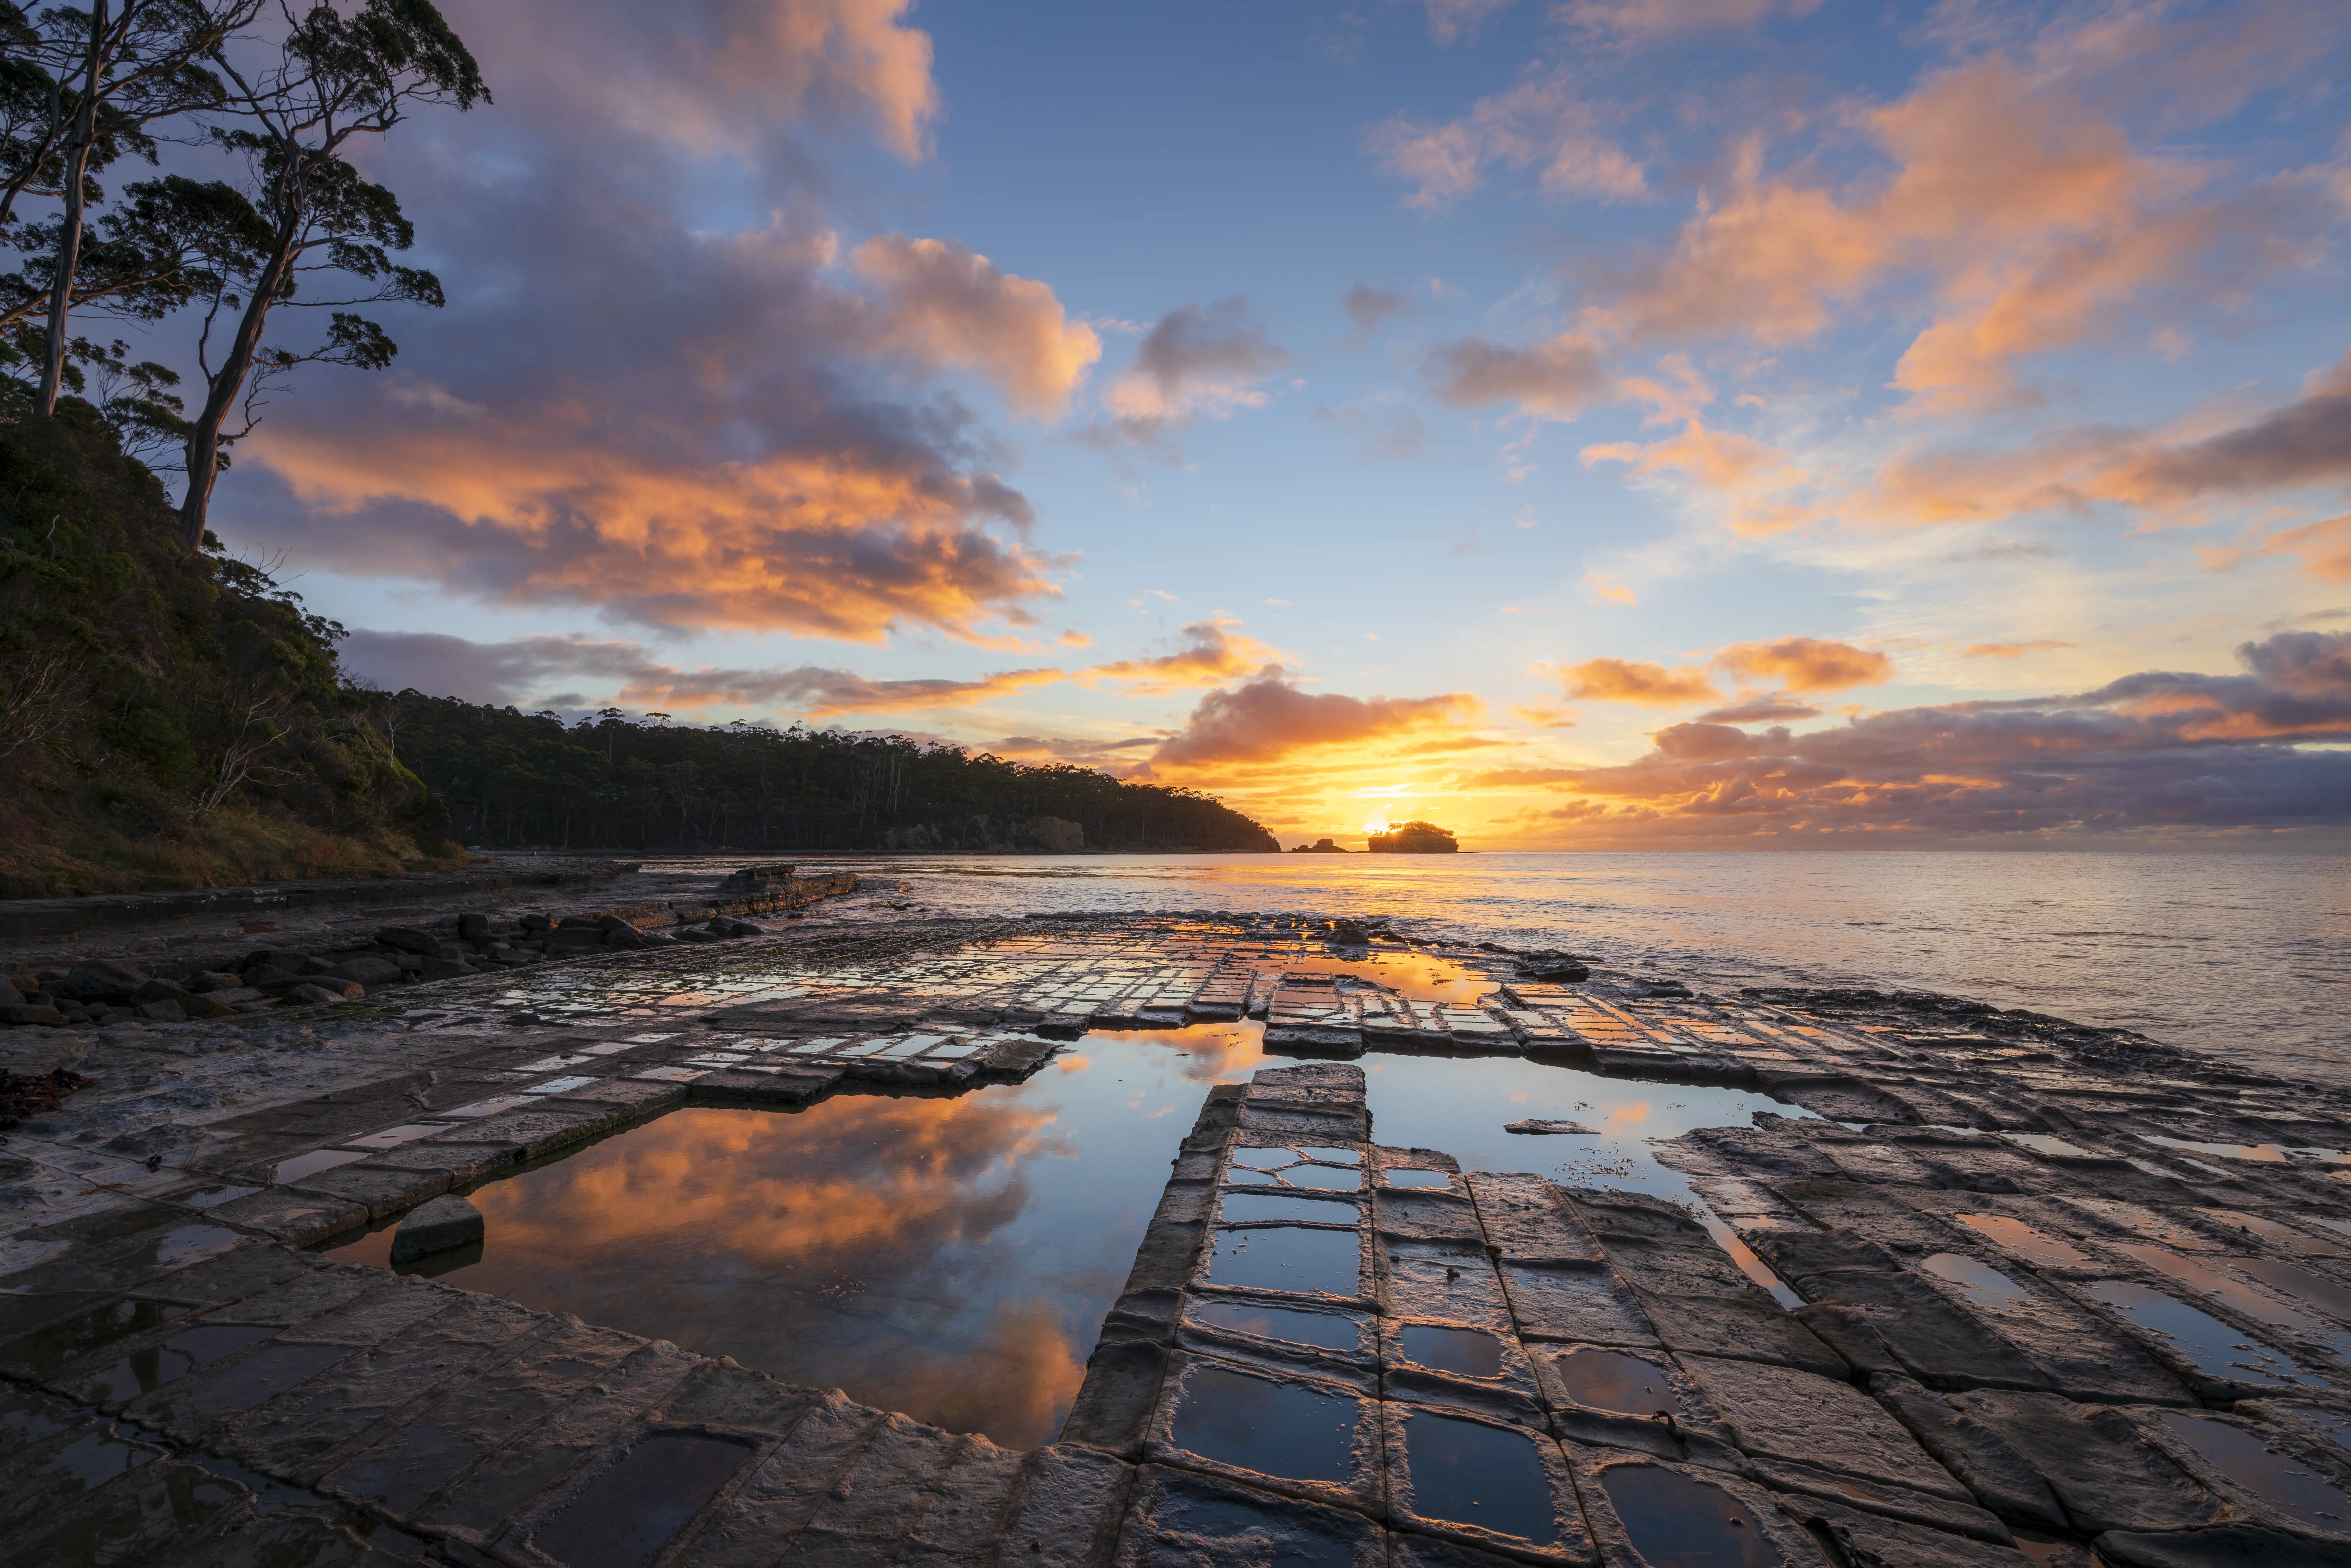 Tessellated pattern rock formation with a sunrise in the background